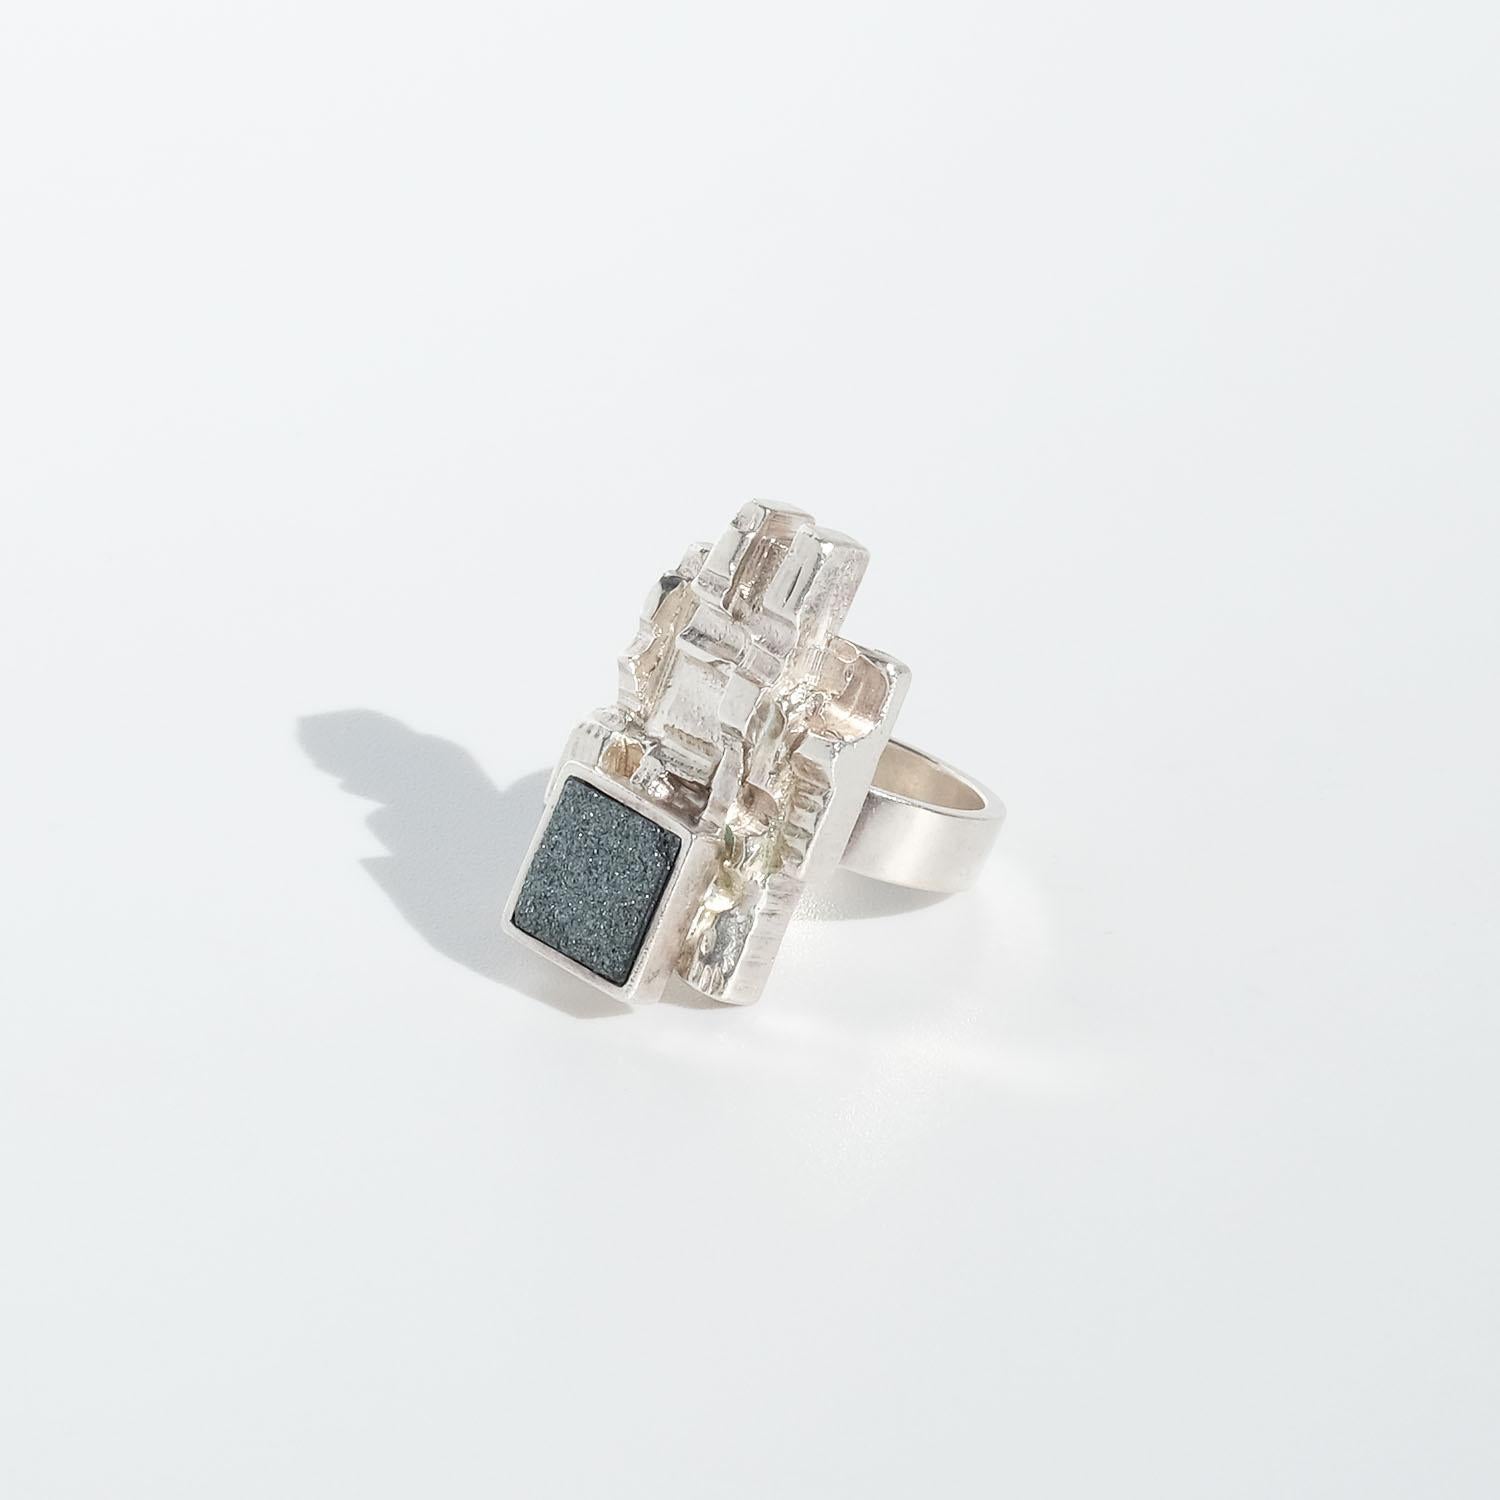 Vintage Silver and Black Stone Ring by Swedish Master Claës Giertta made 1977 For Sale 5